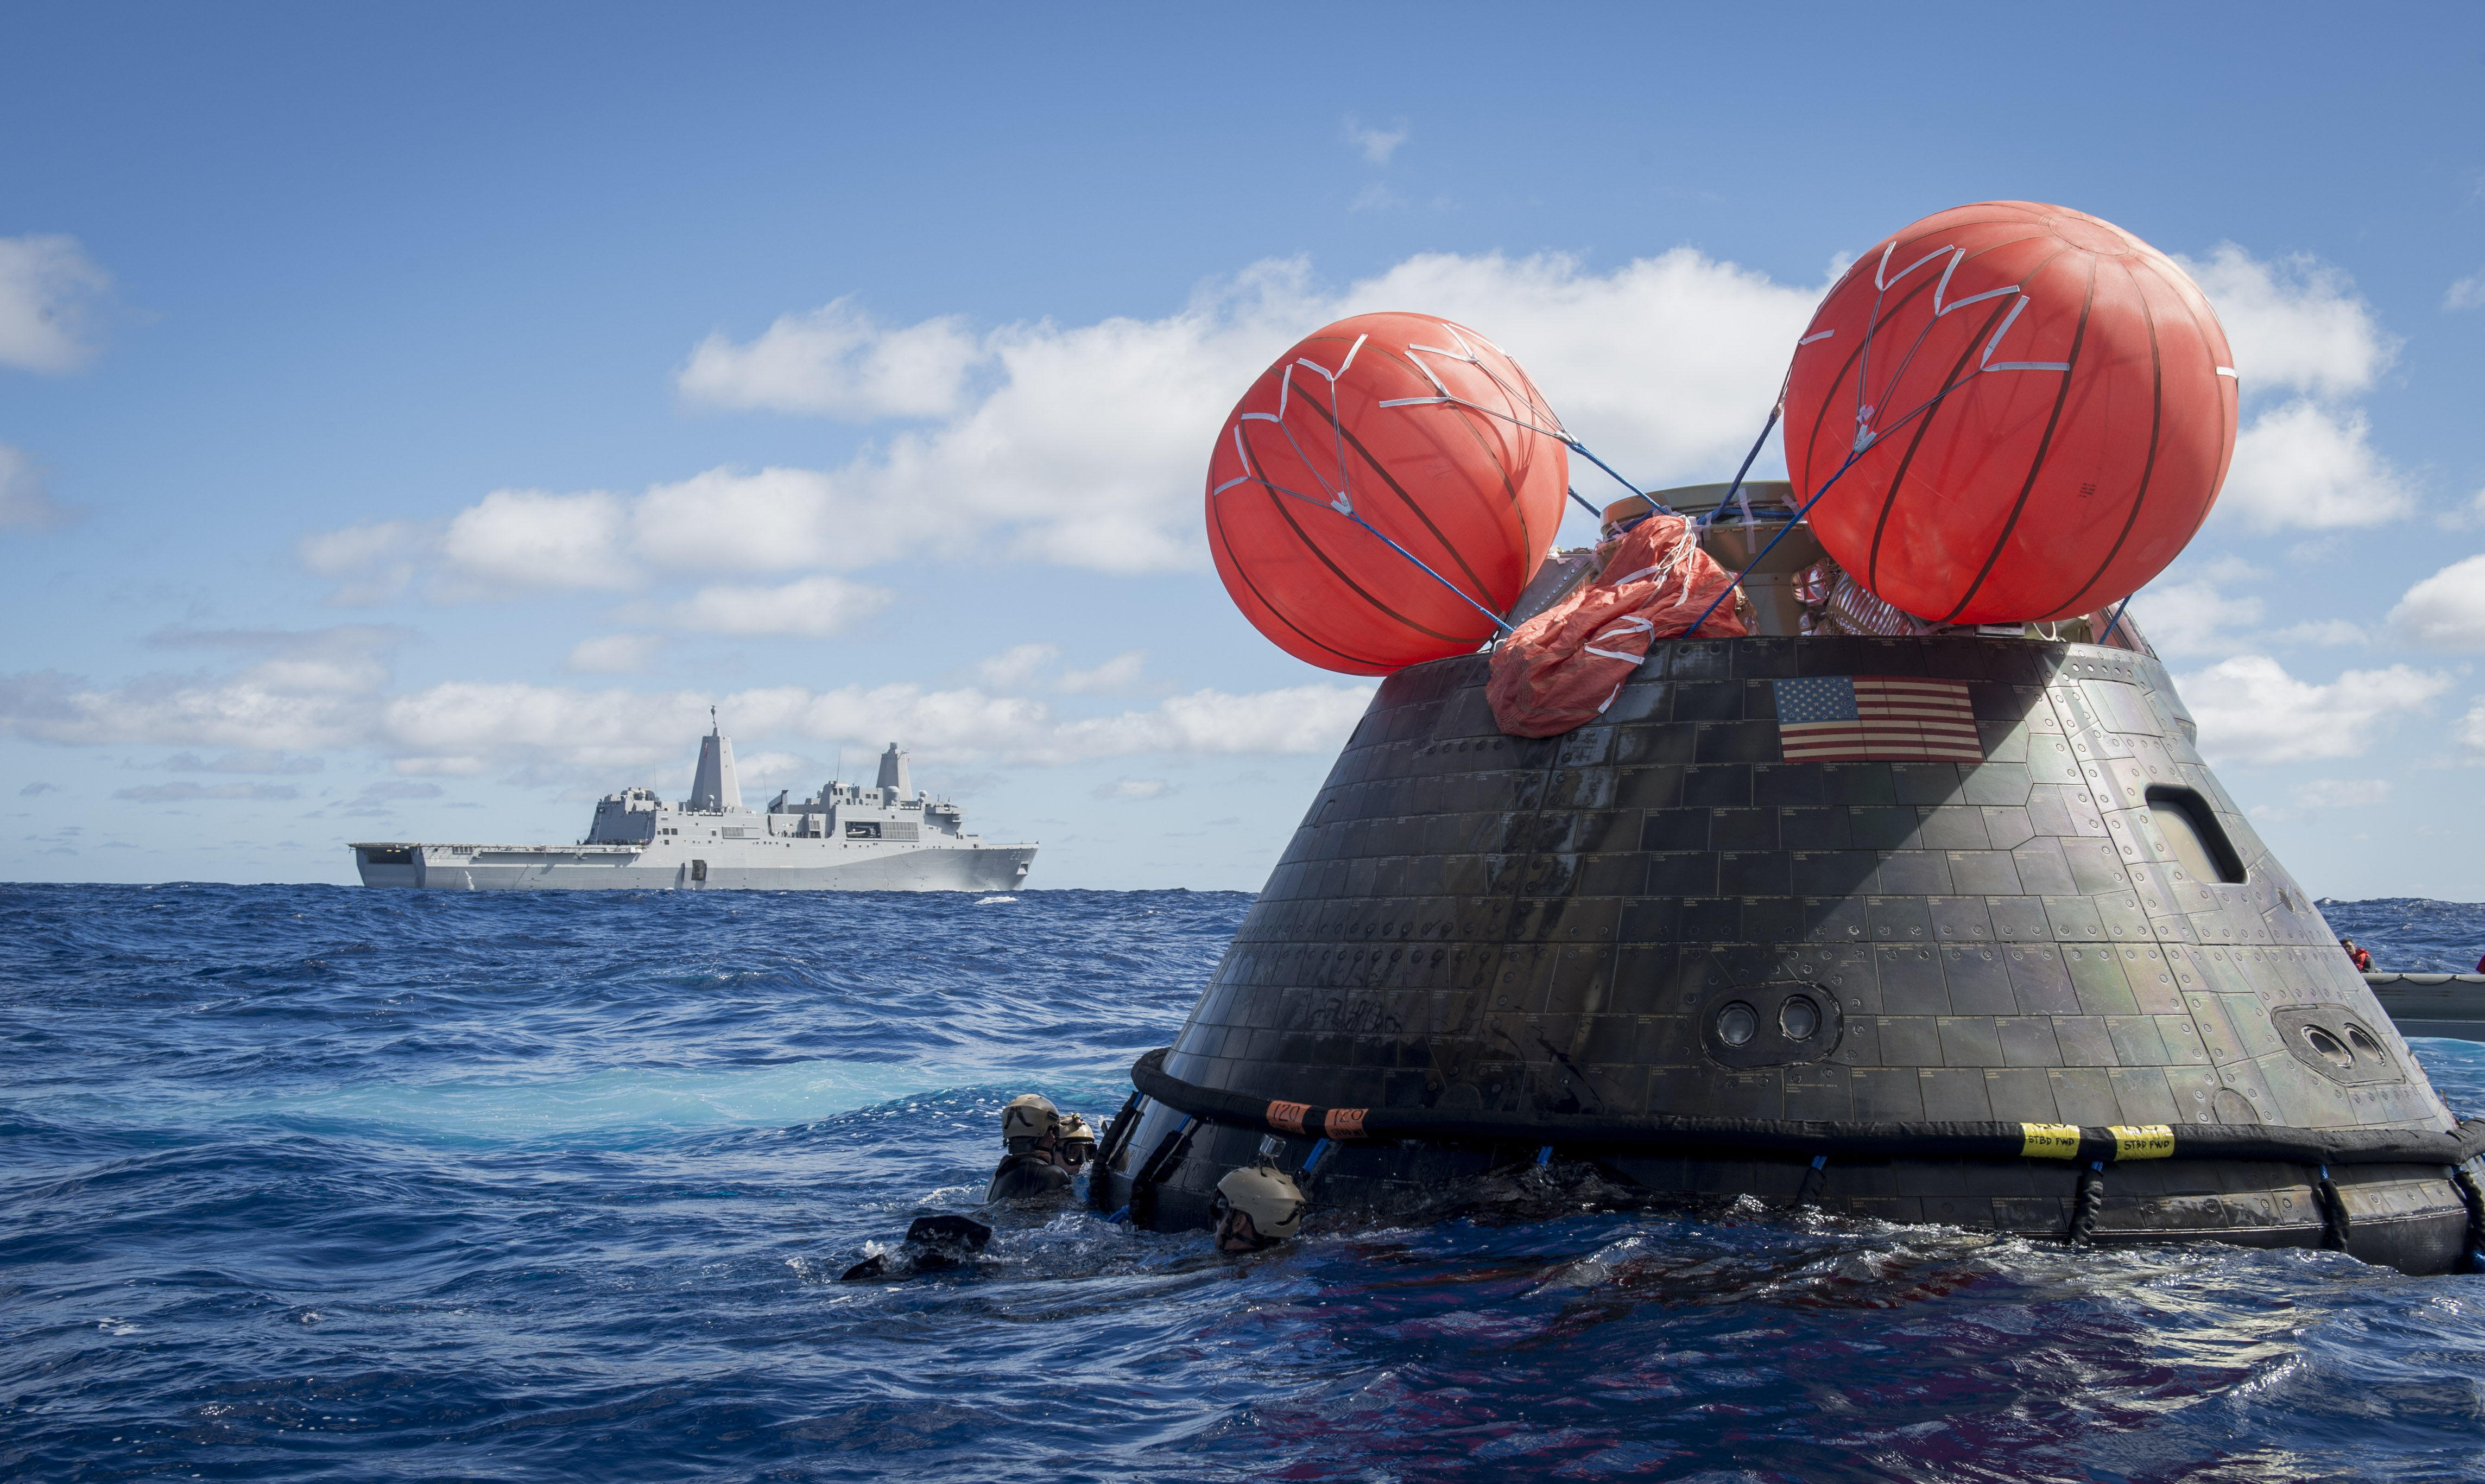 Navy divers assigned to Explosive Ordnance Disposal Mobile Unit (EODMU) 11 and Mobile Diving and Salvage Company 11‐7, attach a towing bridle to the NASA Orion crew module on Dec. 5, 2014. US Navy Photo